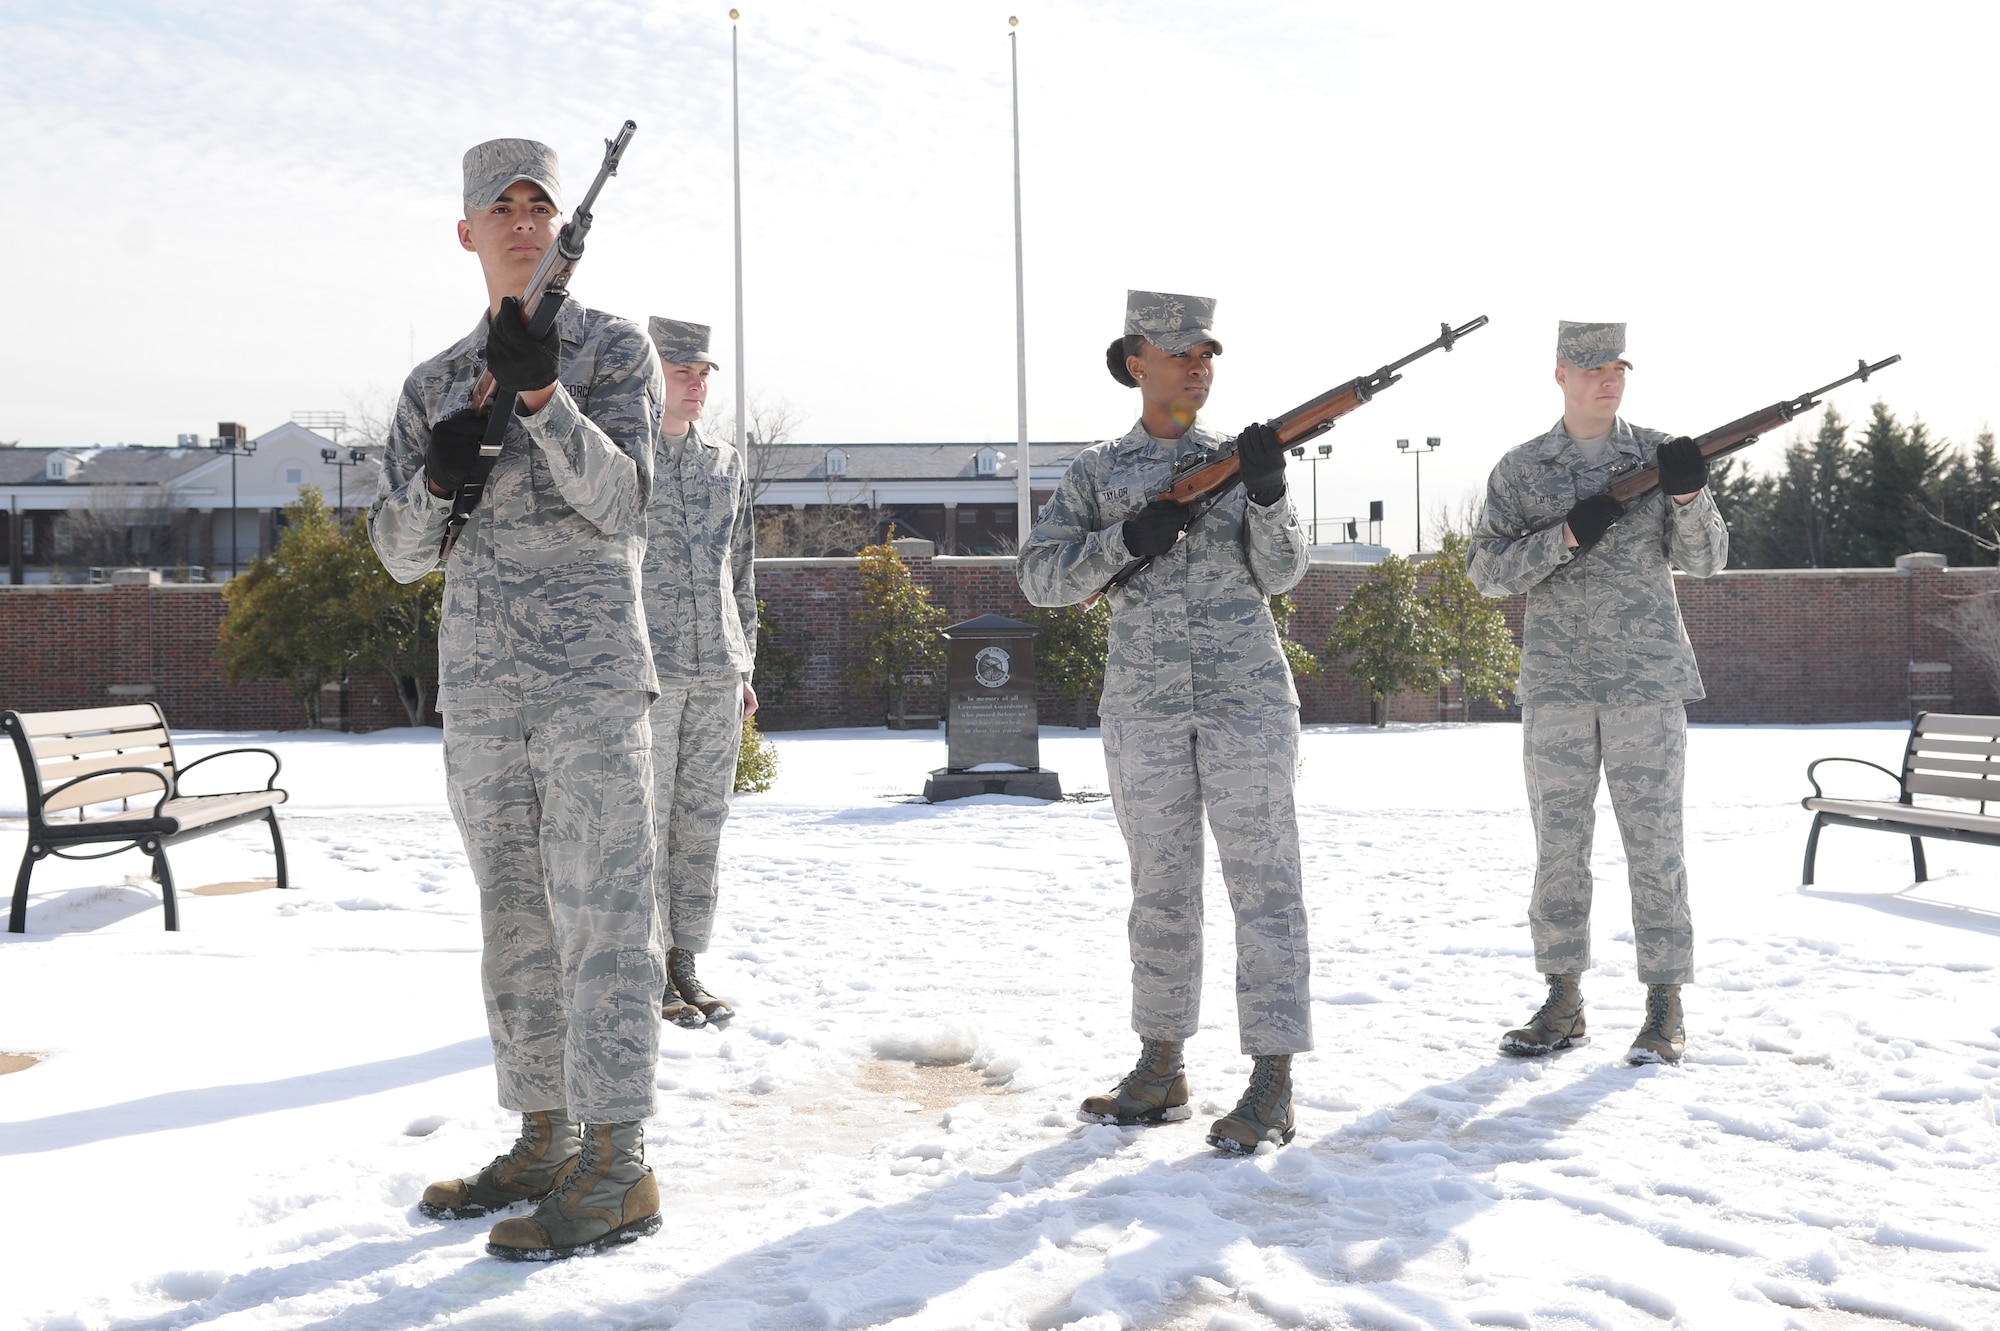 Airman 1st Class Grace Taylor (center) trains with members of the United States Air Force Honor Guard’s firing party at Joint Base Anacostia-Bolling, Washington, D.C., on March 4, 2014. Taylor, a tech school instructor, is still fully qualified to be on the firing party. The firing party performs the firing of three volleys during funeral services at Arlington National Cemetery. (U.S. Air Force photo/Airman 1st Class Ryan J. Sonnier)